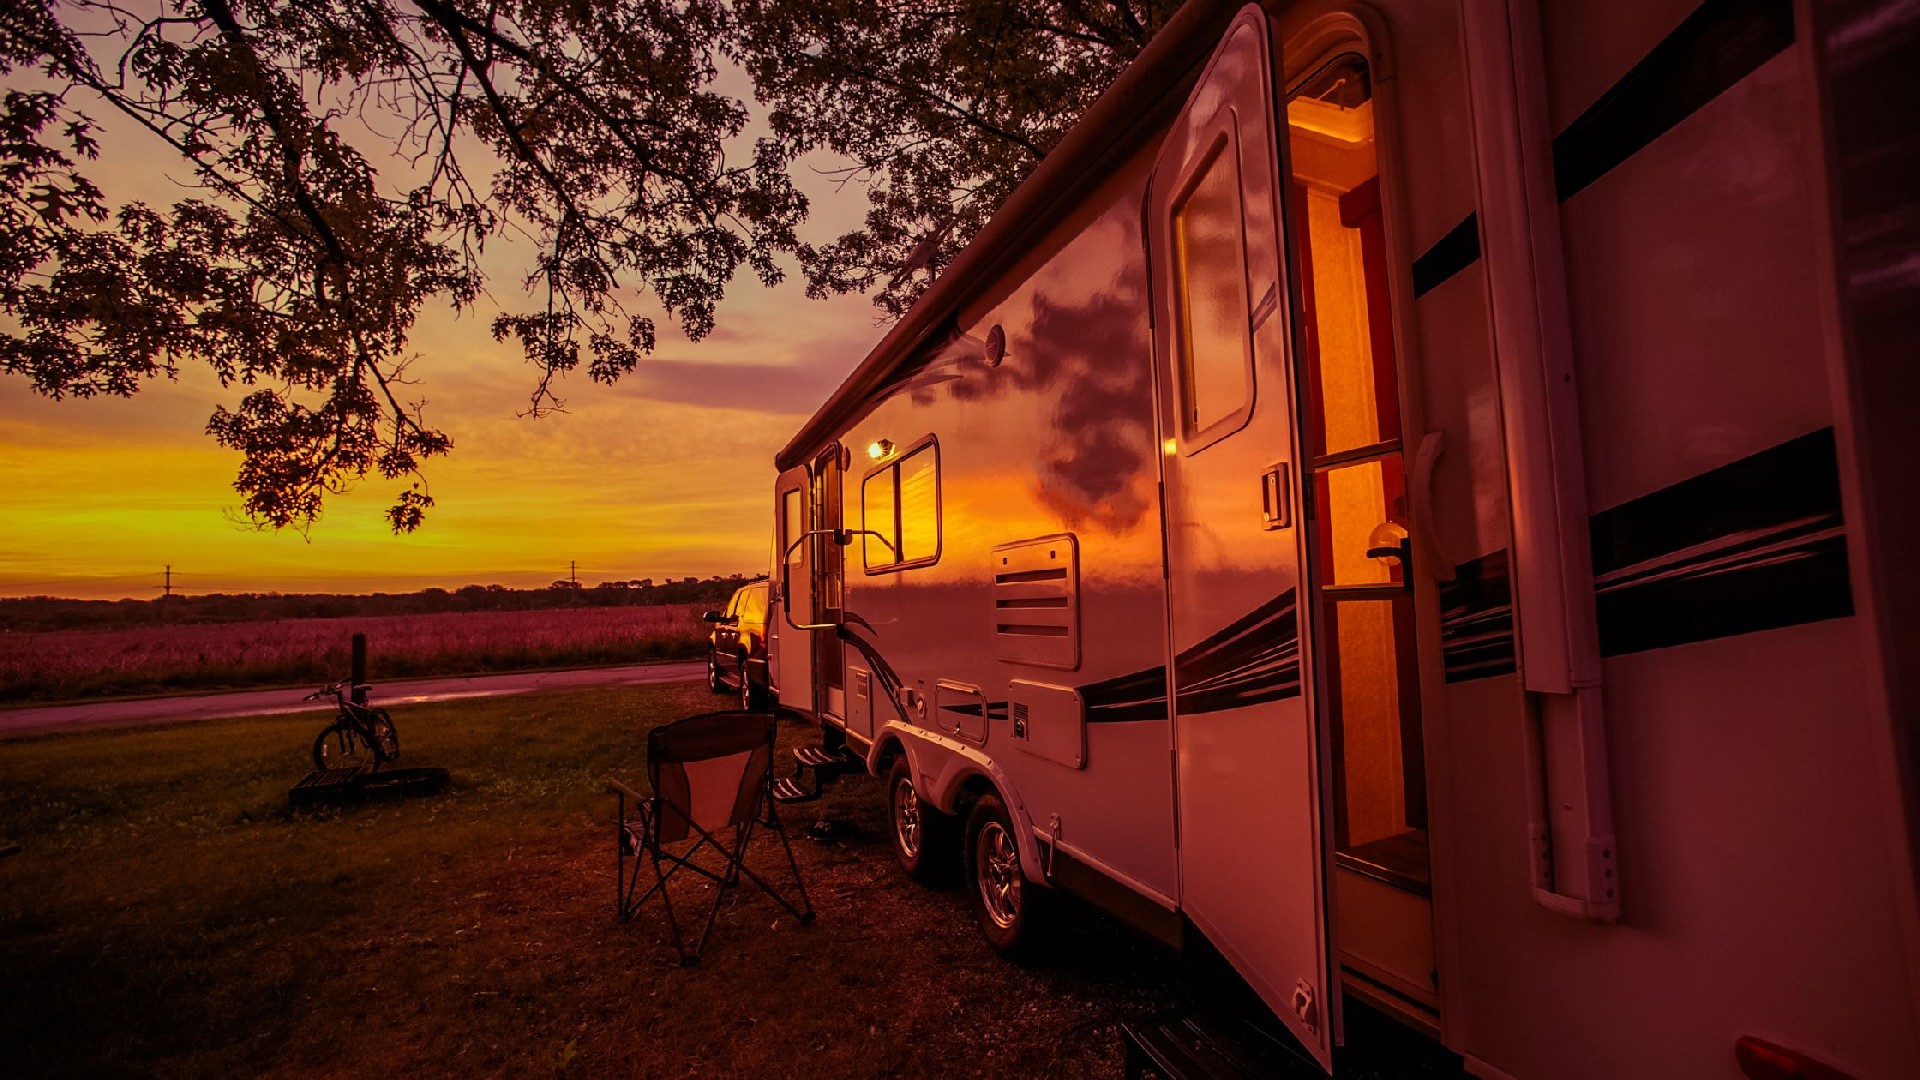 How To Improve Travel Trailer Security - 37 Tips to Keep Your Vehicle Safe?